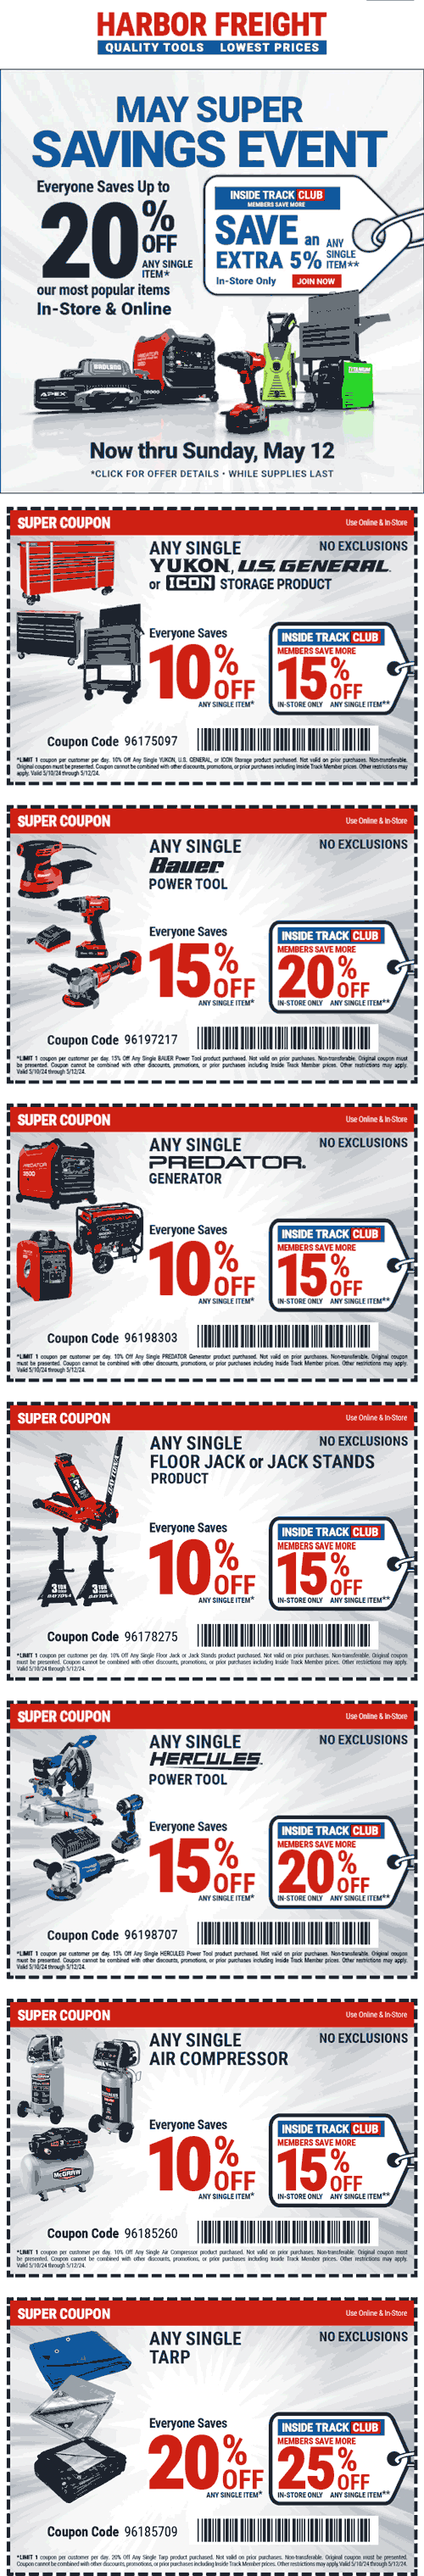 Harbor Freight stores Coupon  Various tool deals at Harbor Freight, ditto online #harborfreight 